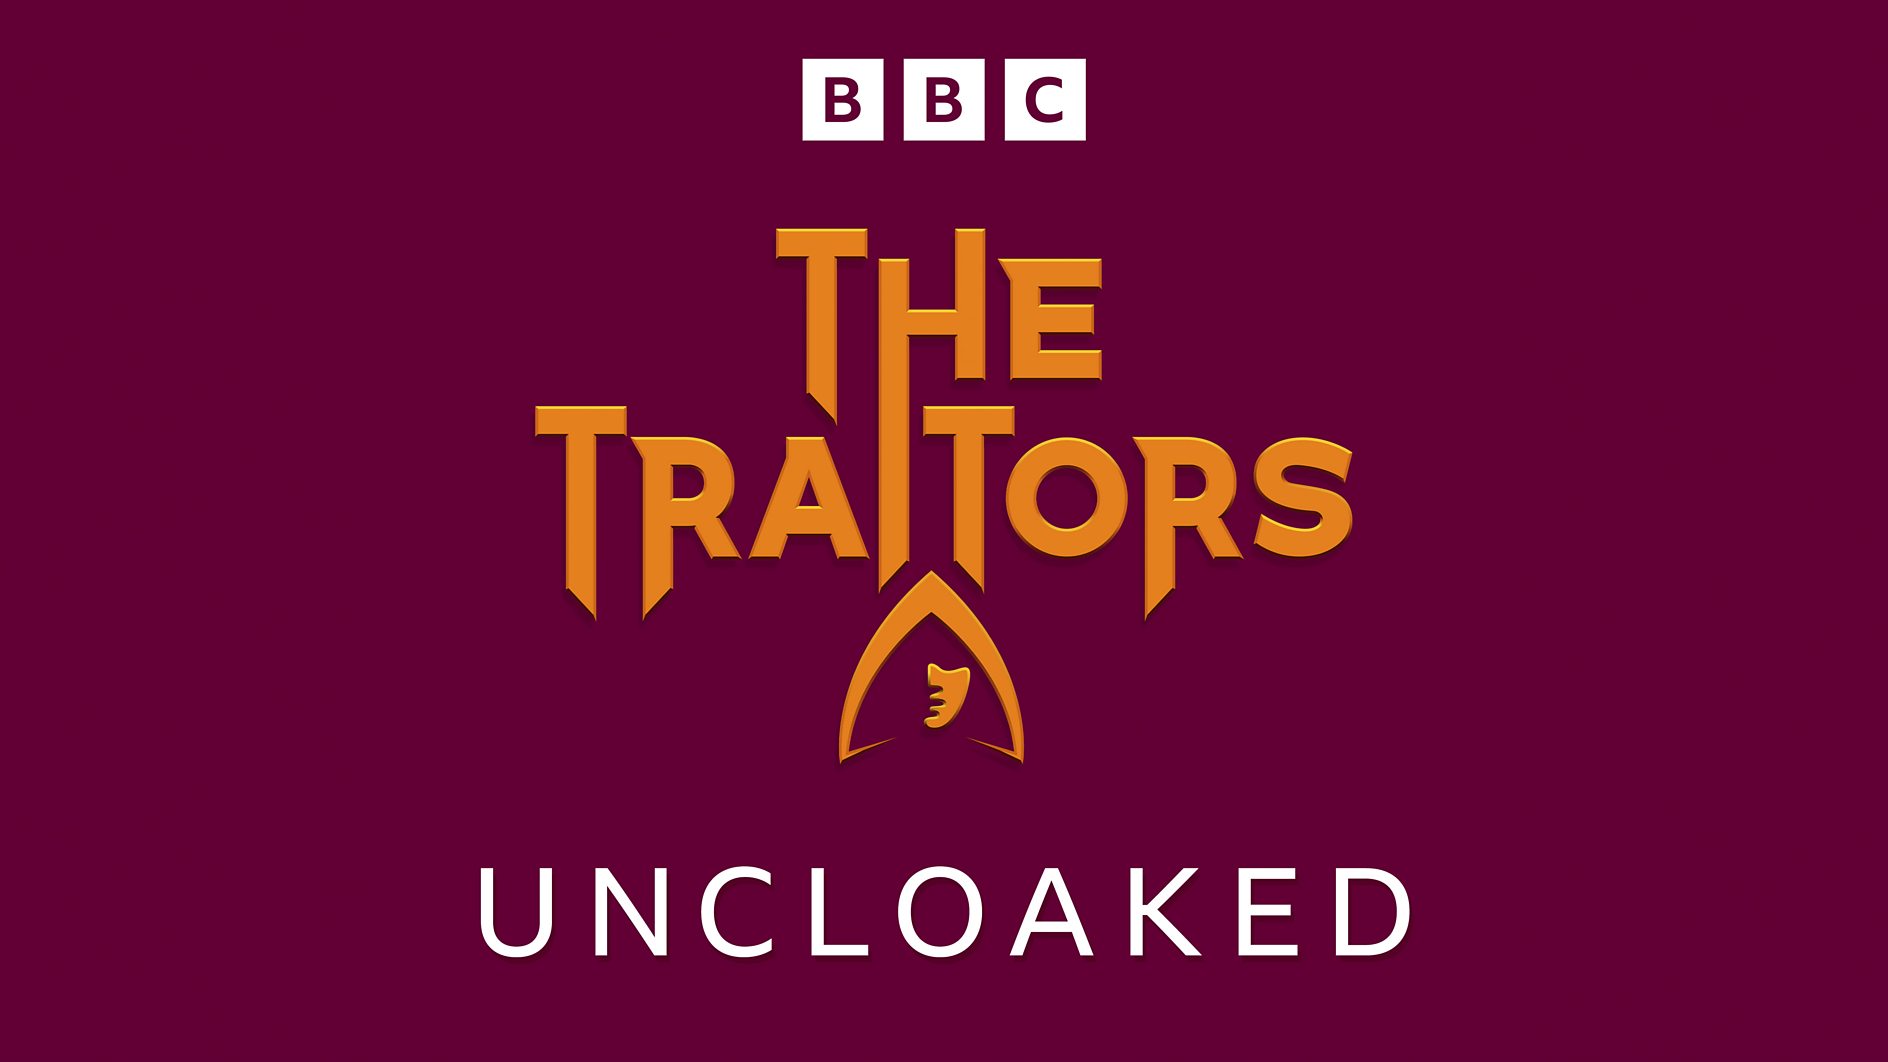 The Traitors: Uncloaked comes to the BBC